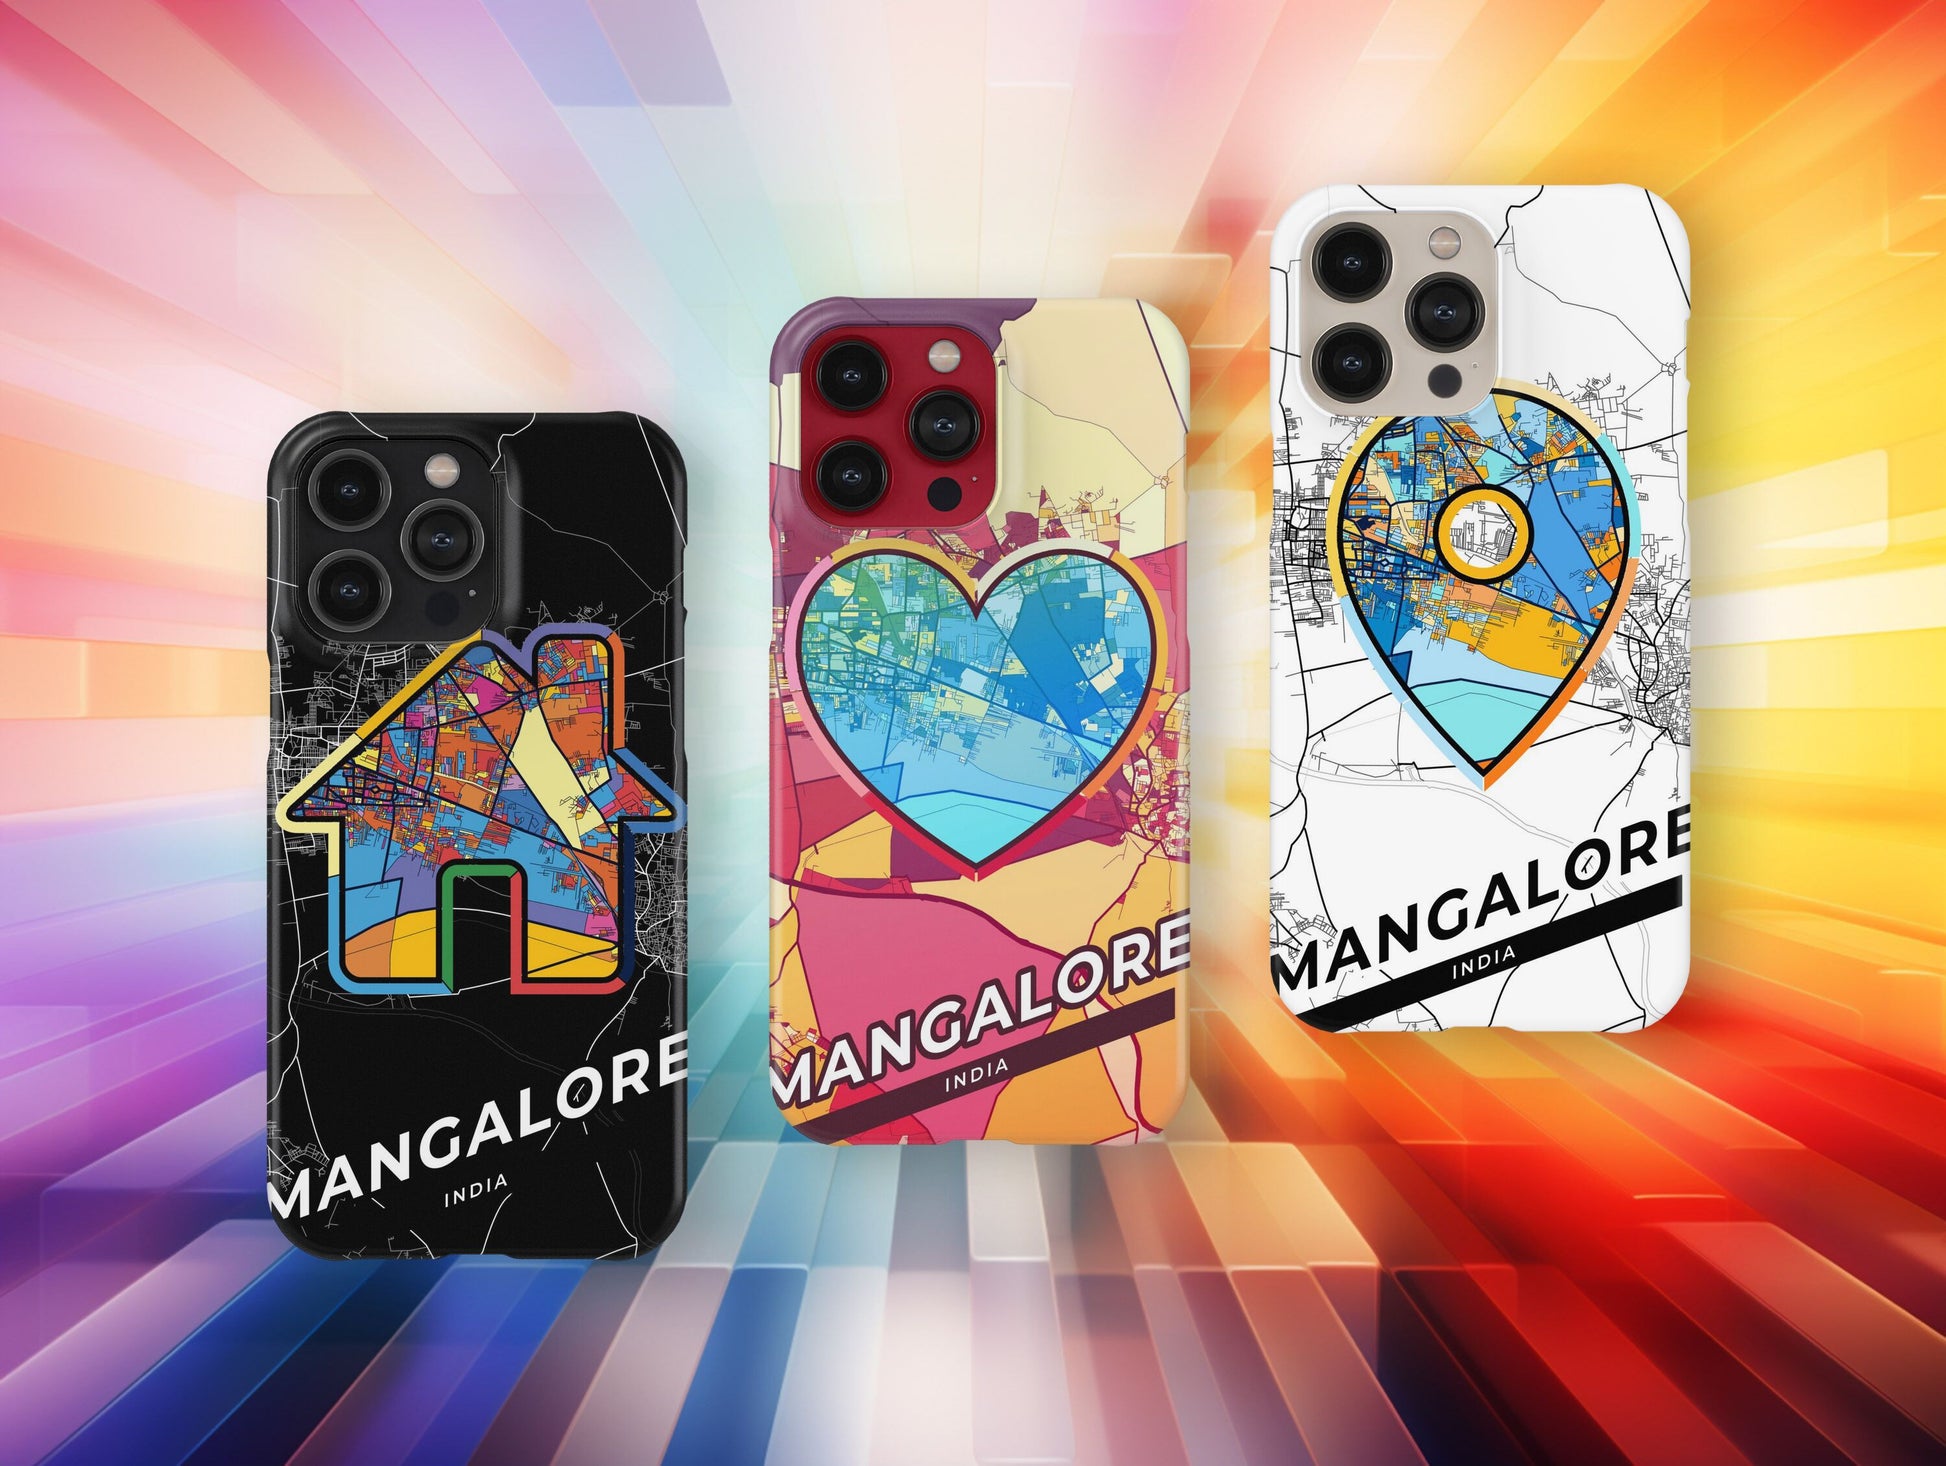 Mangalore India slim phone case with colorful icon. Birthday, wedding or housewarming gift. Couple match cases.